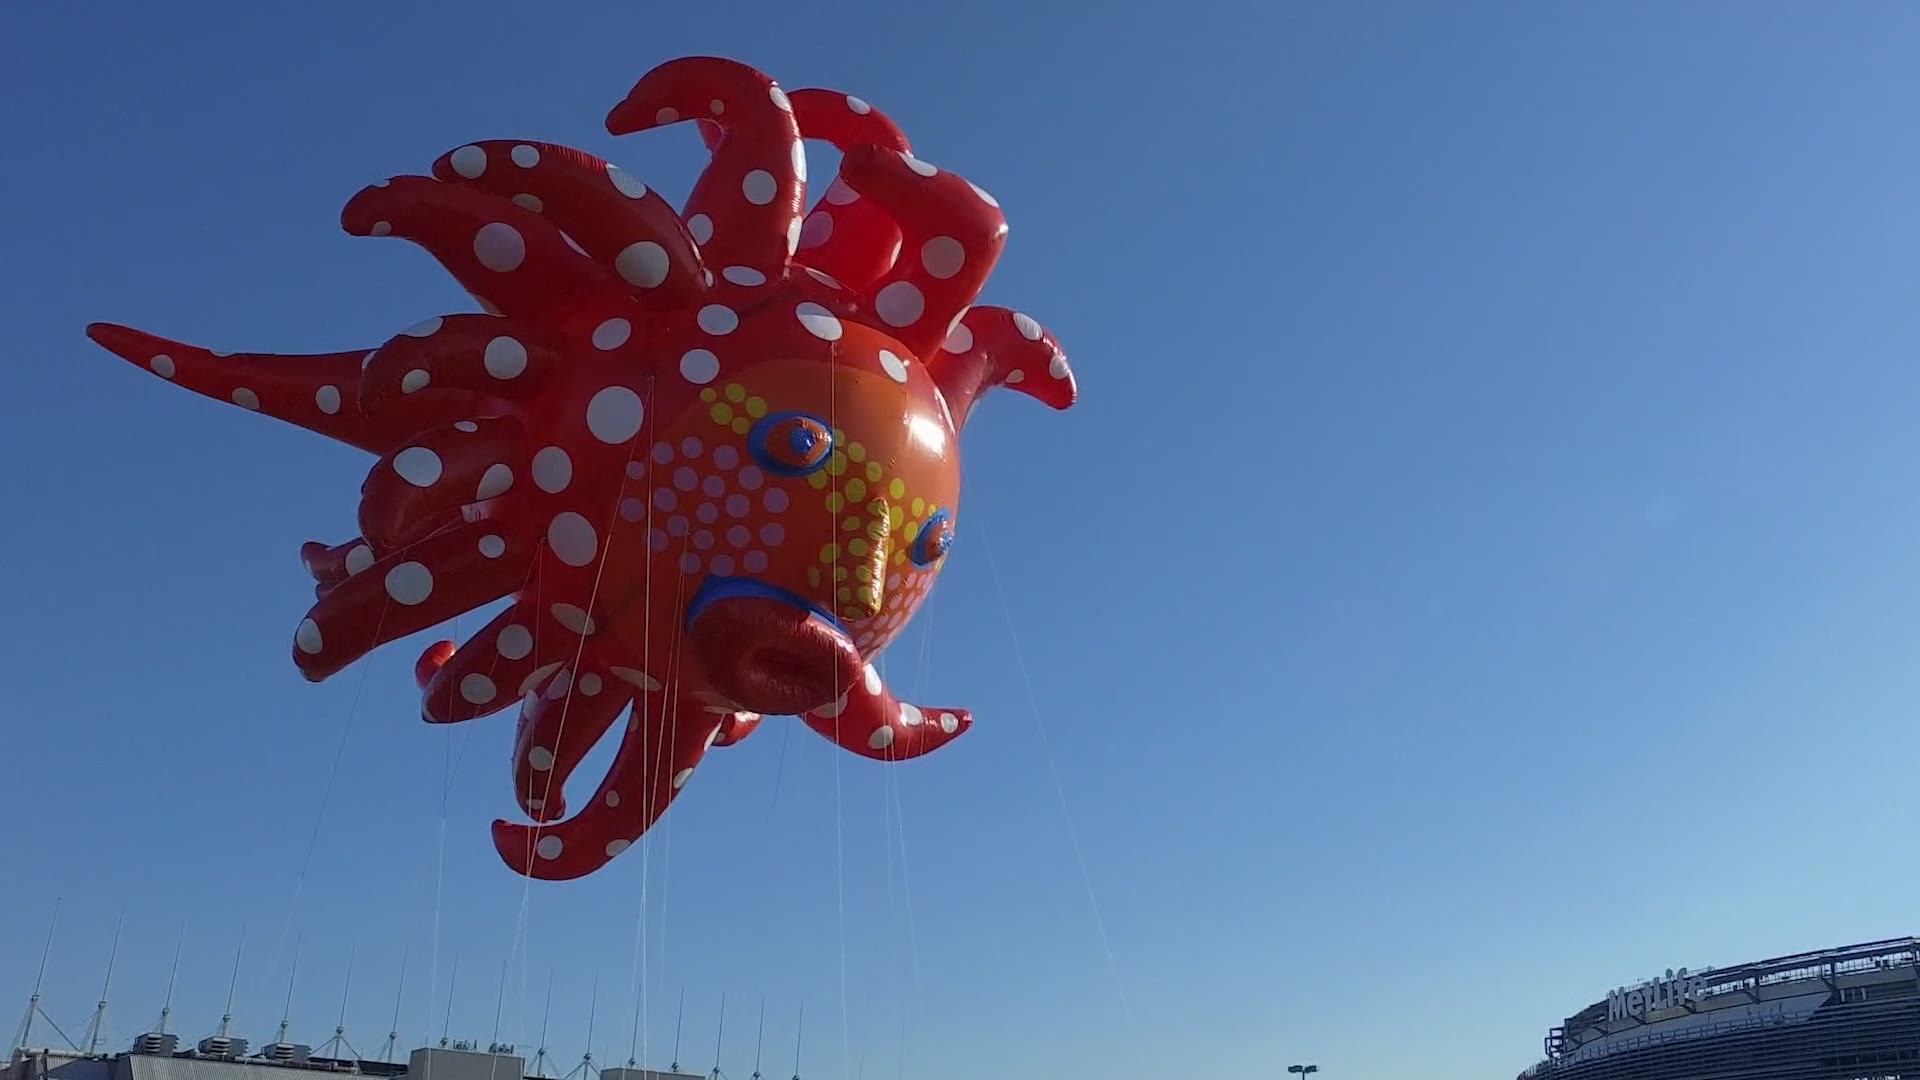 The world’s most renowned female contemporary artist will take her iconic art to new heights as Yayoi Kusama joins the 2019 Macy’s Thanksgiving Day Parade.